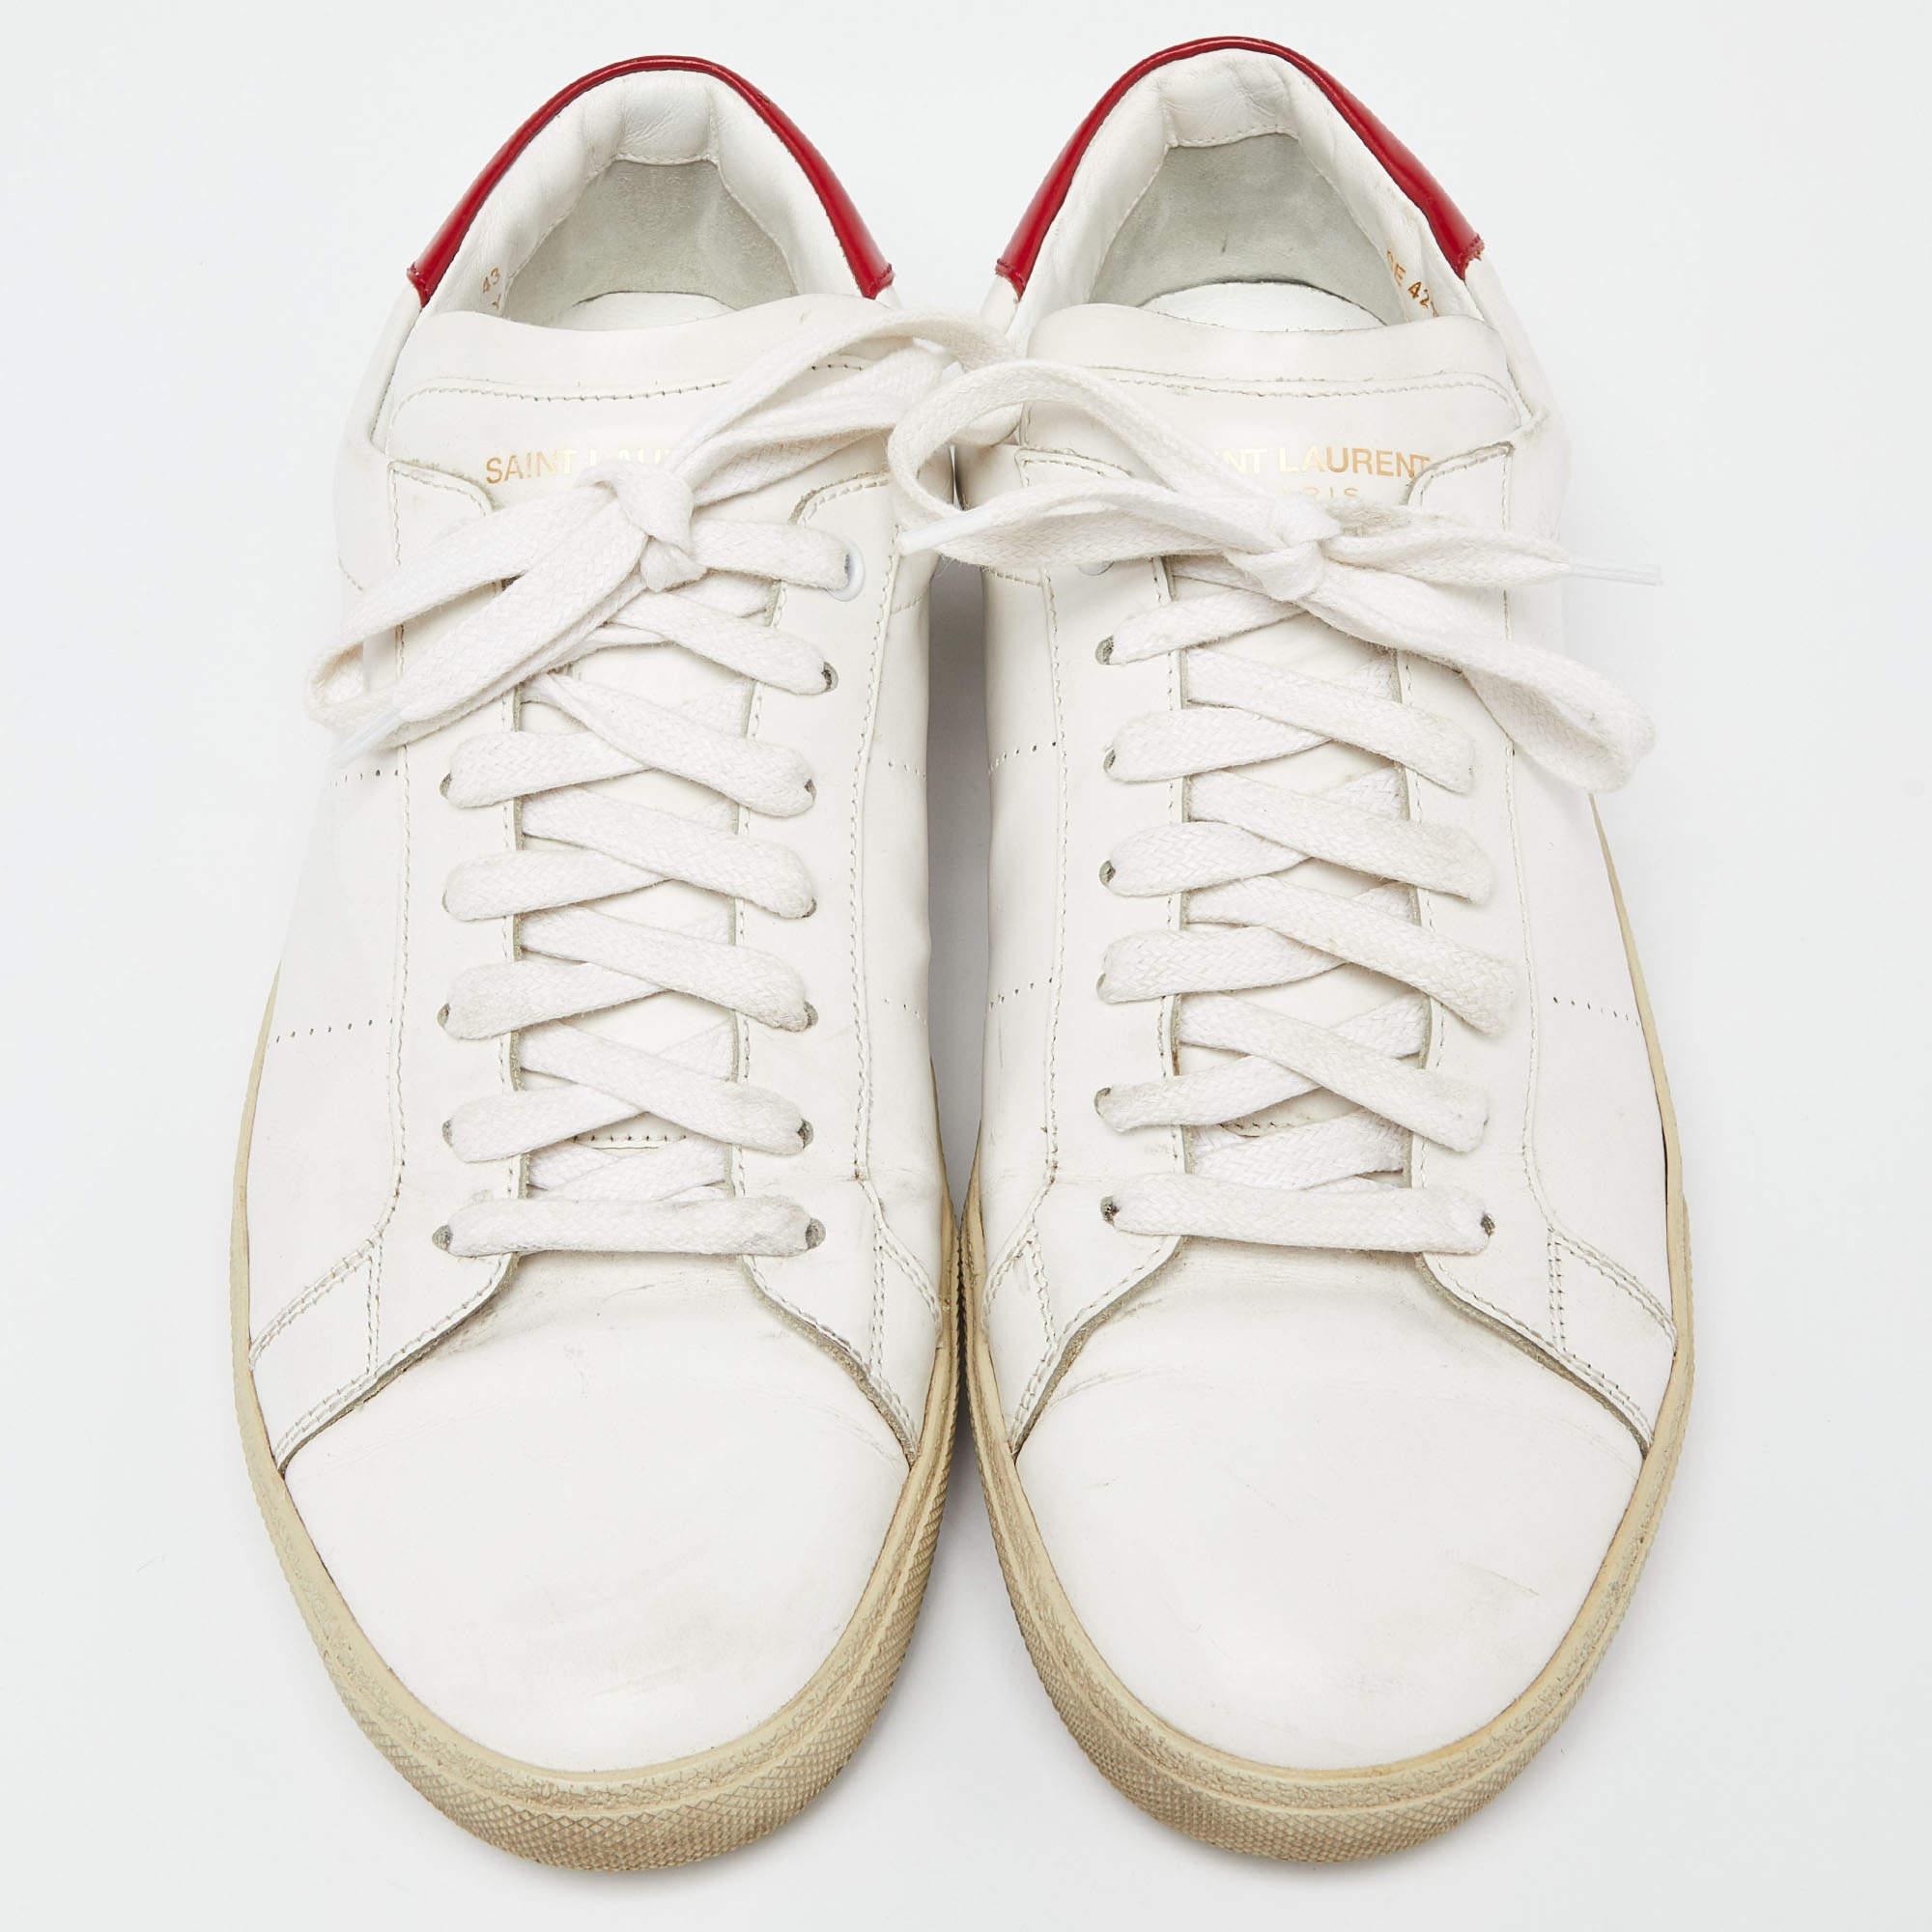 Upgrade your style with these Saint Laurent sneakers. Meticulously designed for fashion and comfort, they're the ideal choice for a trendy and comfortable stride.

